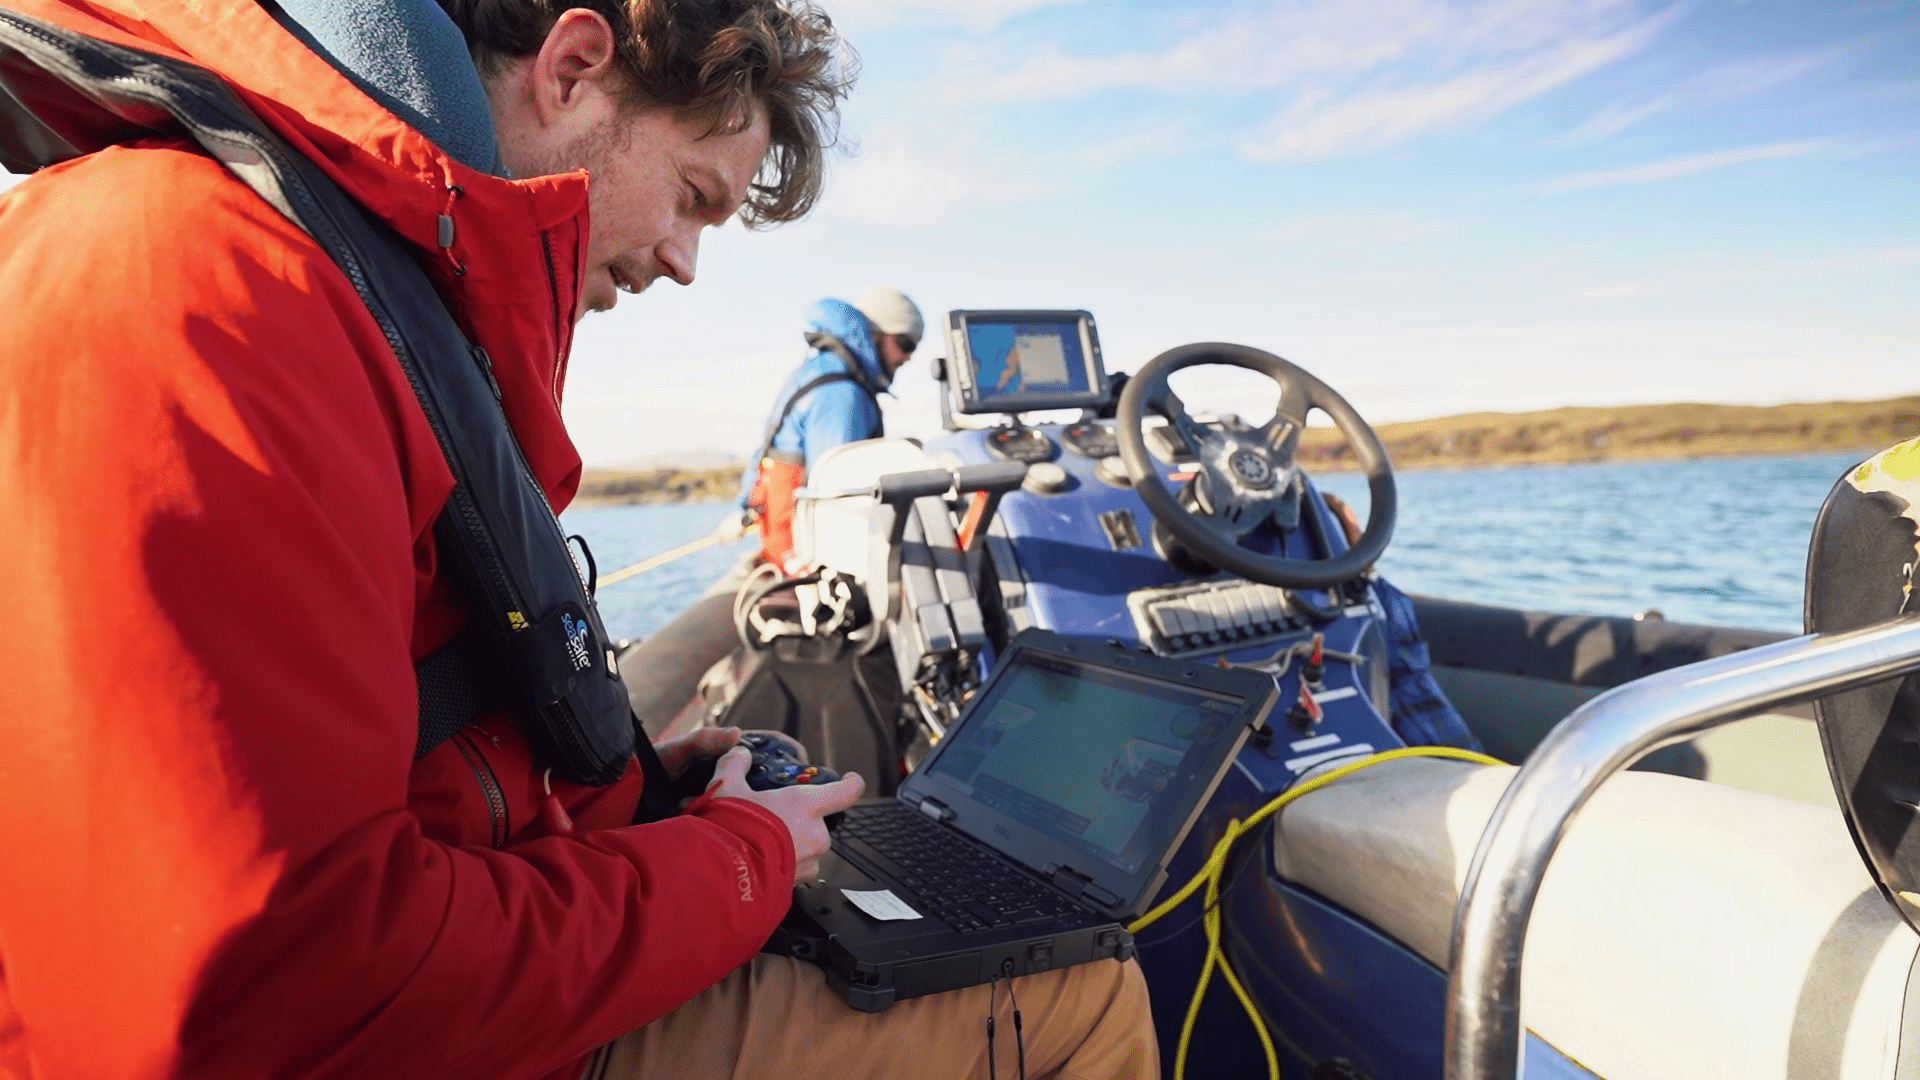 Scottish Association for Marine Science biologist using artificial intelligence and 3D imaging software